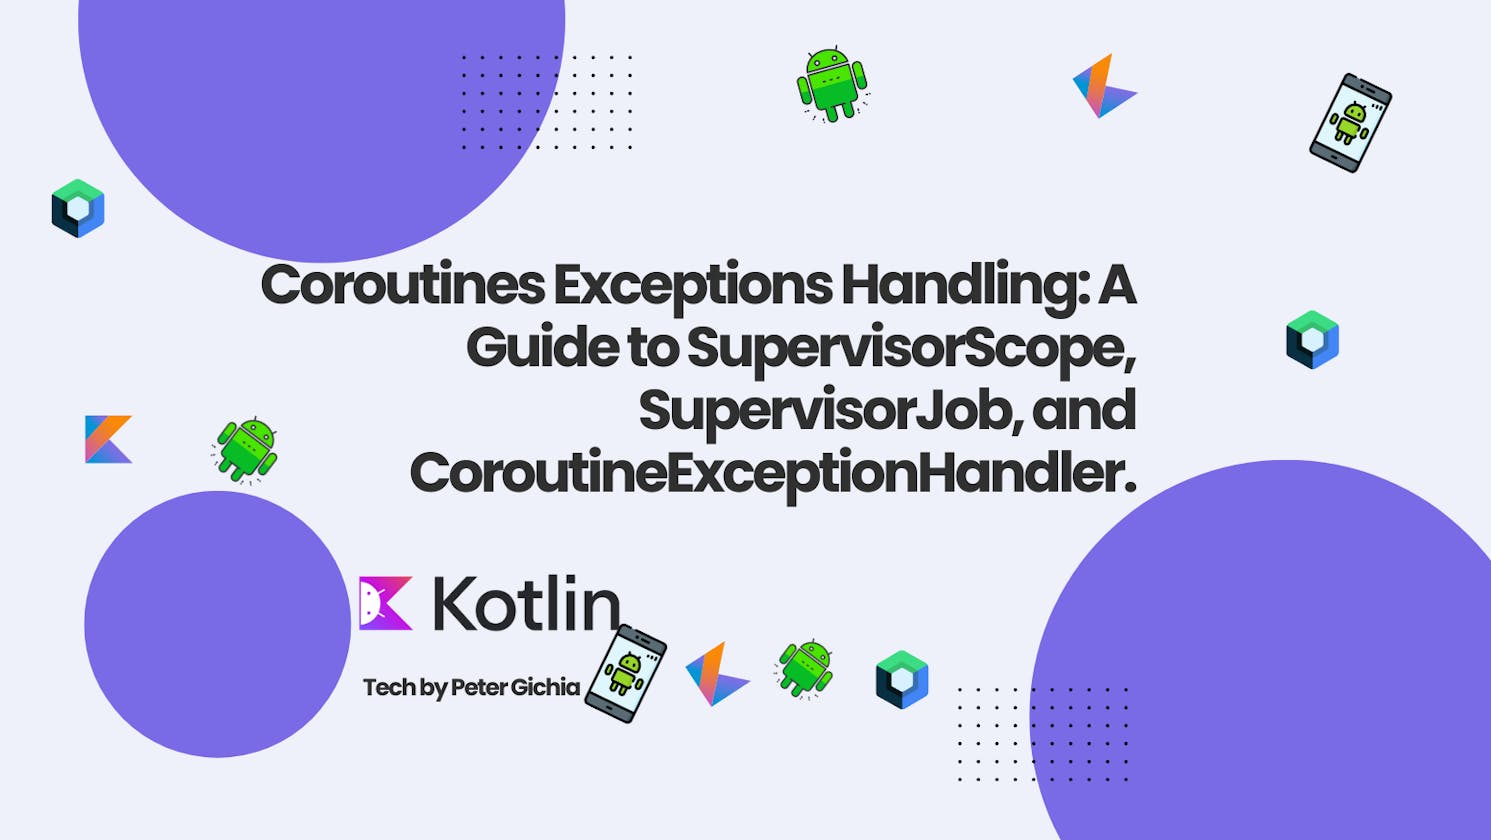 Coroutines Exceptions Handling: A Guide to SupervisorScope, SupervisorJob, and CoroutineExceptionHandler.